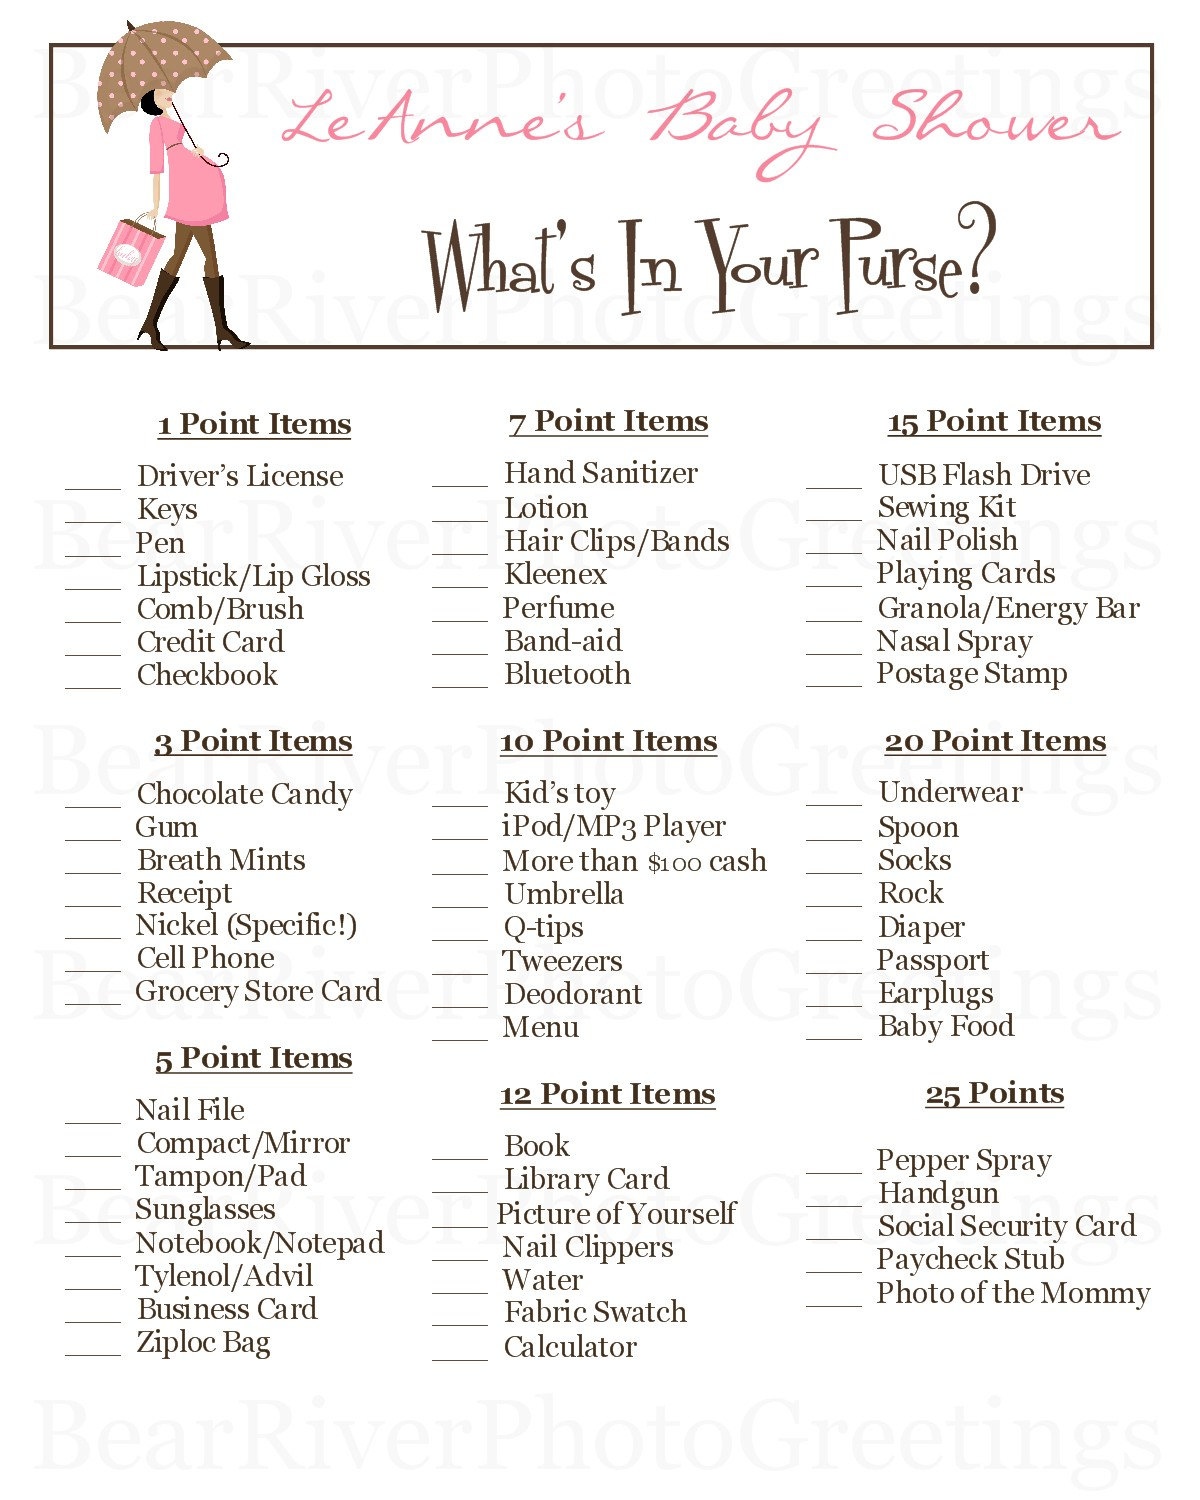 Baby Shower Food Ideas: Baby Shower Ideas Printable Games - Free Printable Baby Shower Games What&amp;amp;#039;s In Your Purse